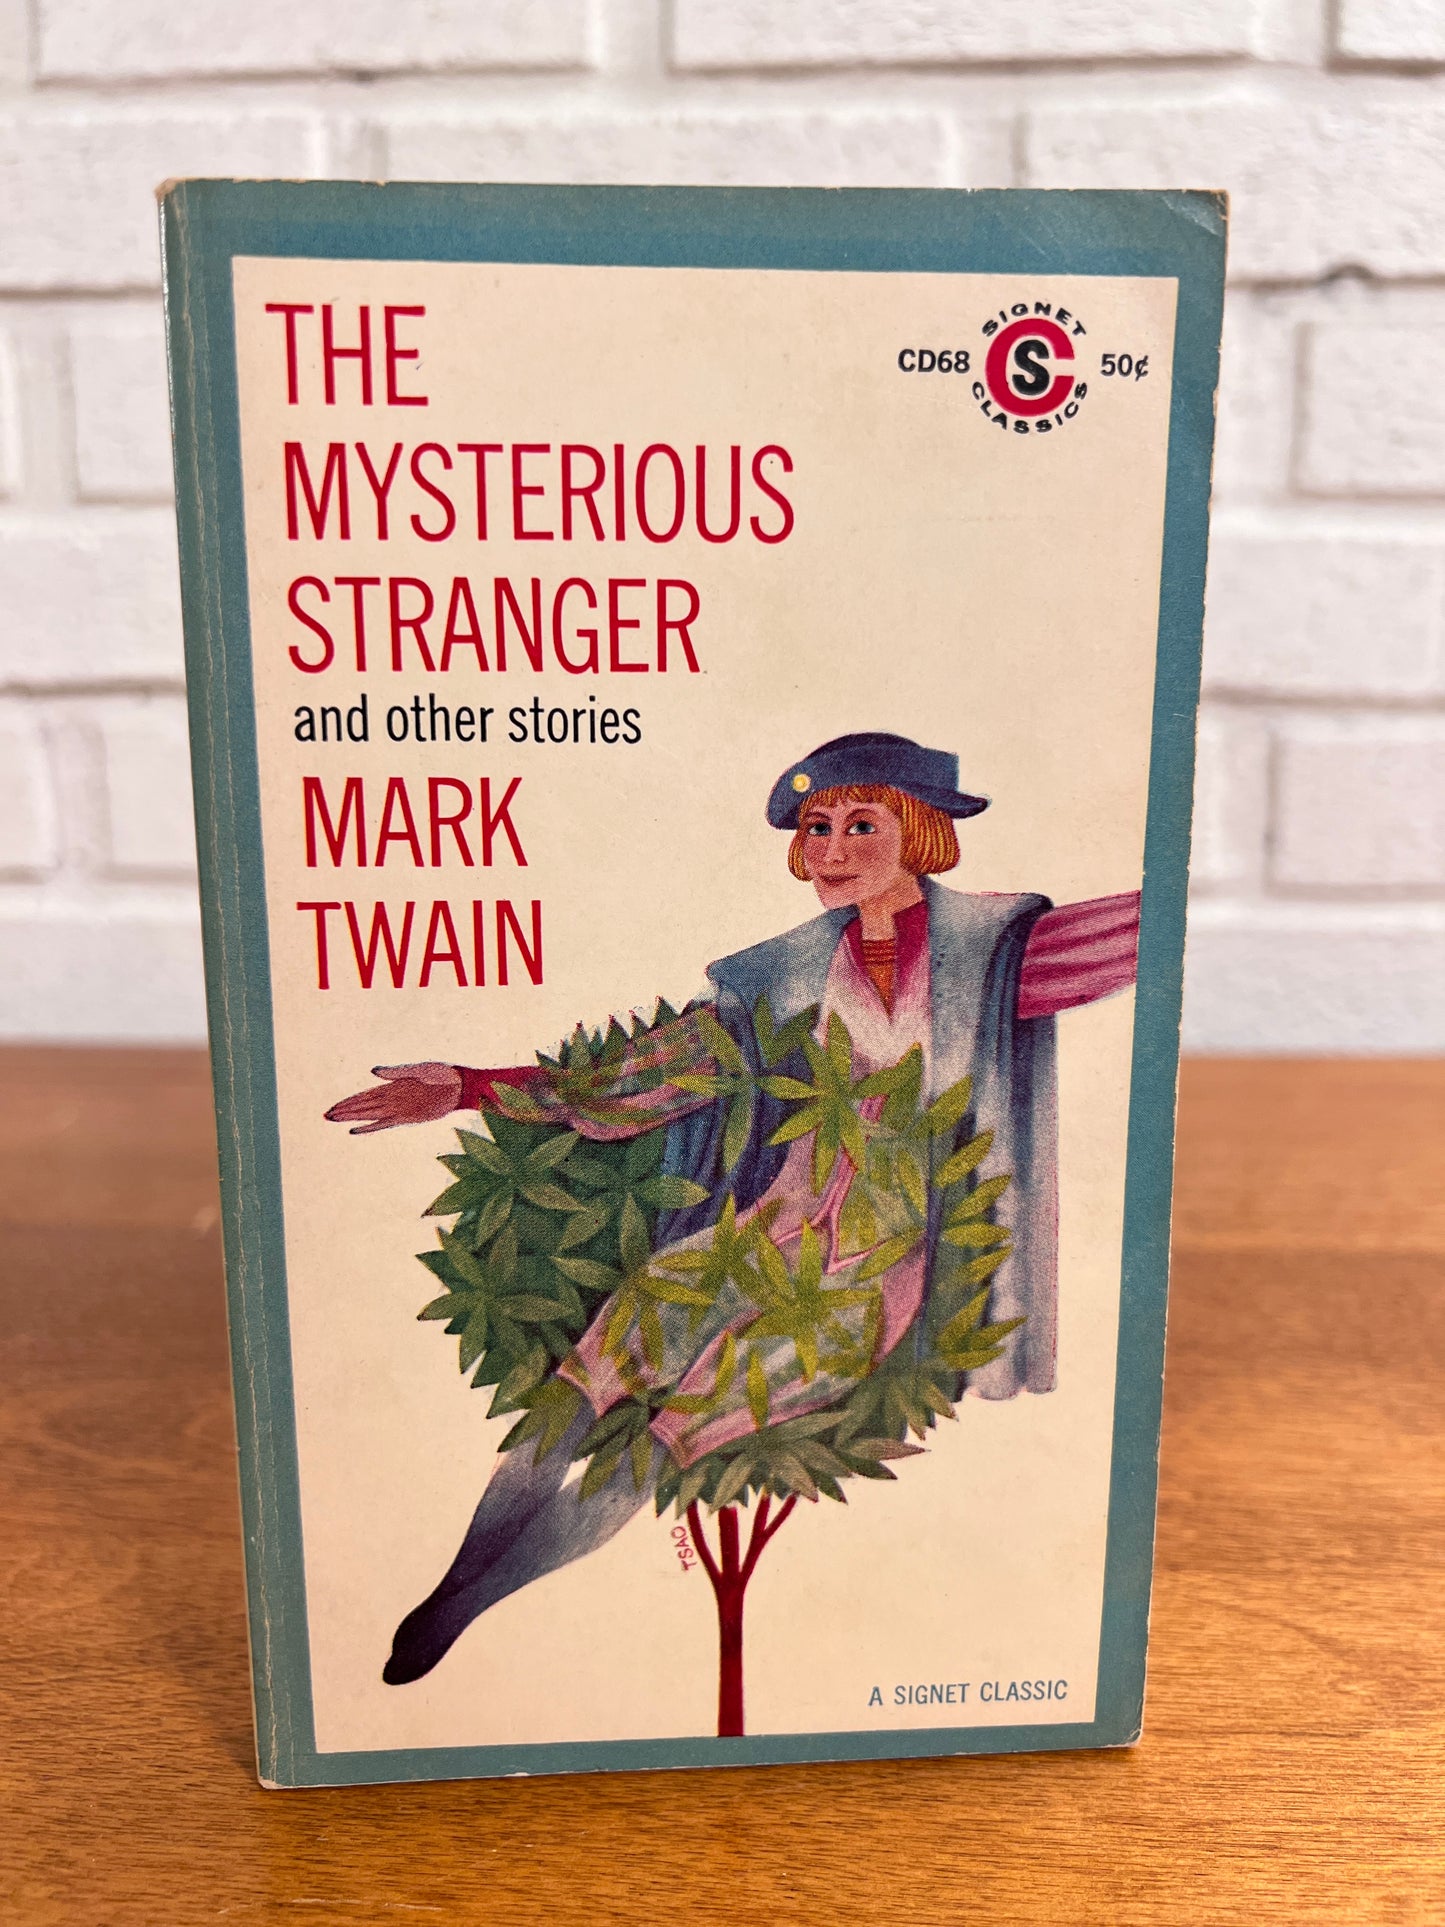 The Mysterious Stranger and Other Stories by Mark Twain [1962, 1st Print]